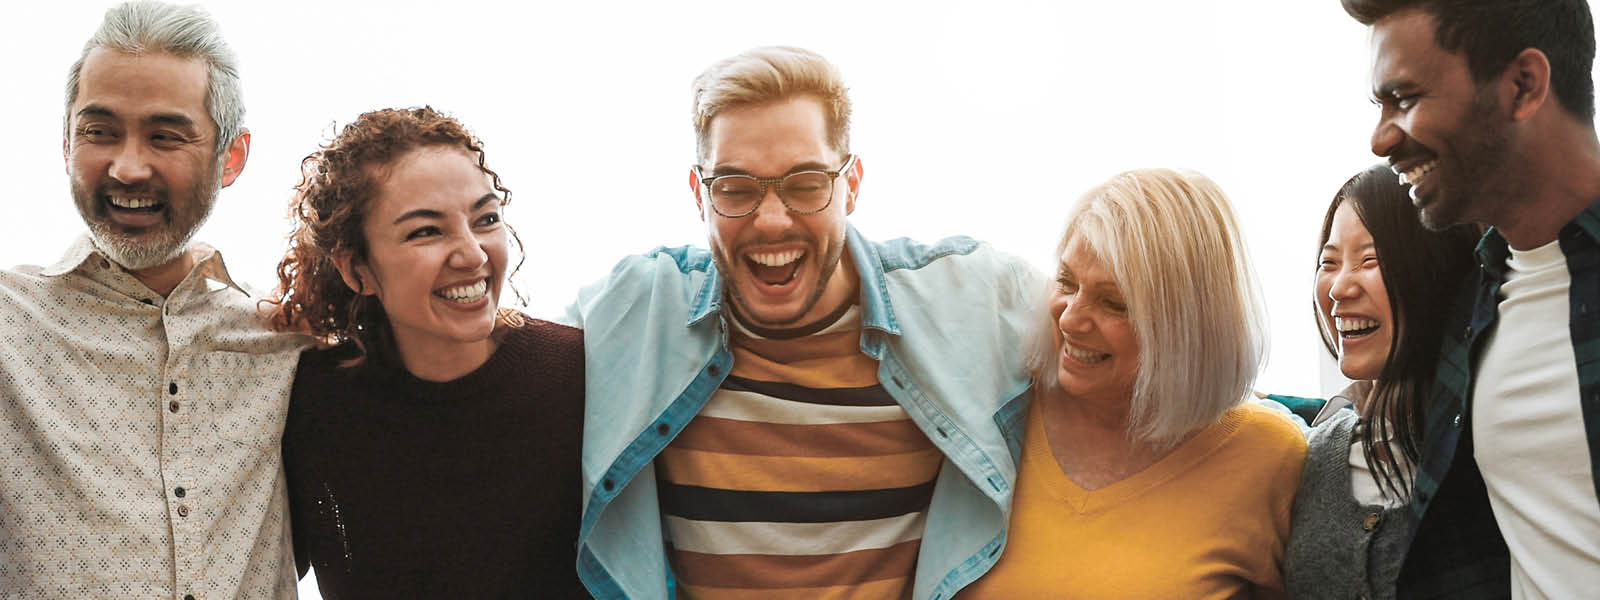 Photo of a group of people smiling and laughing